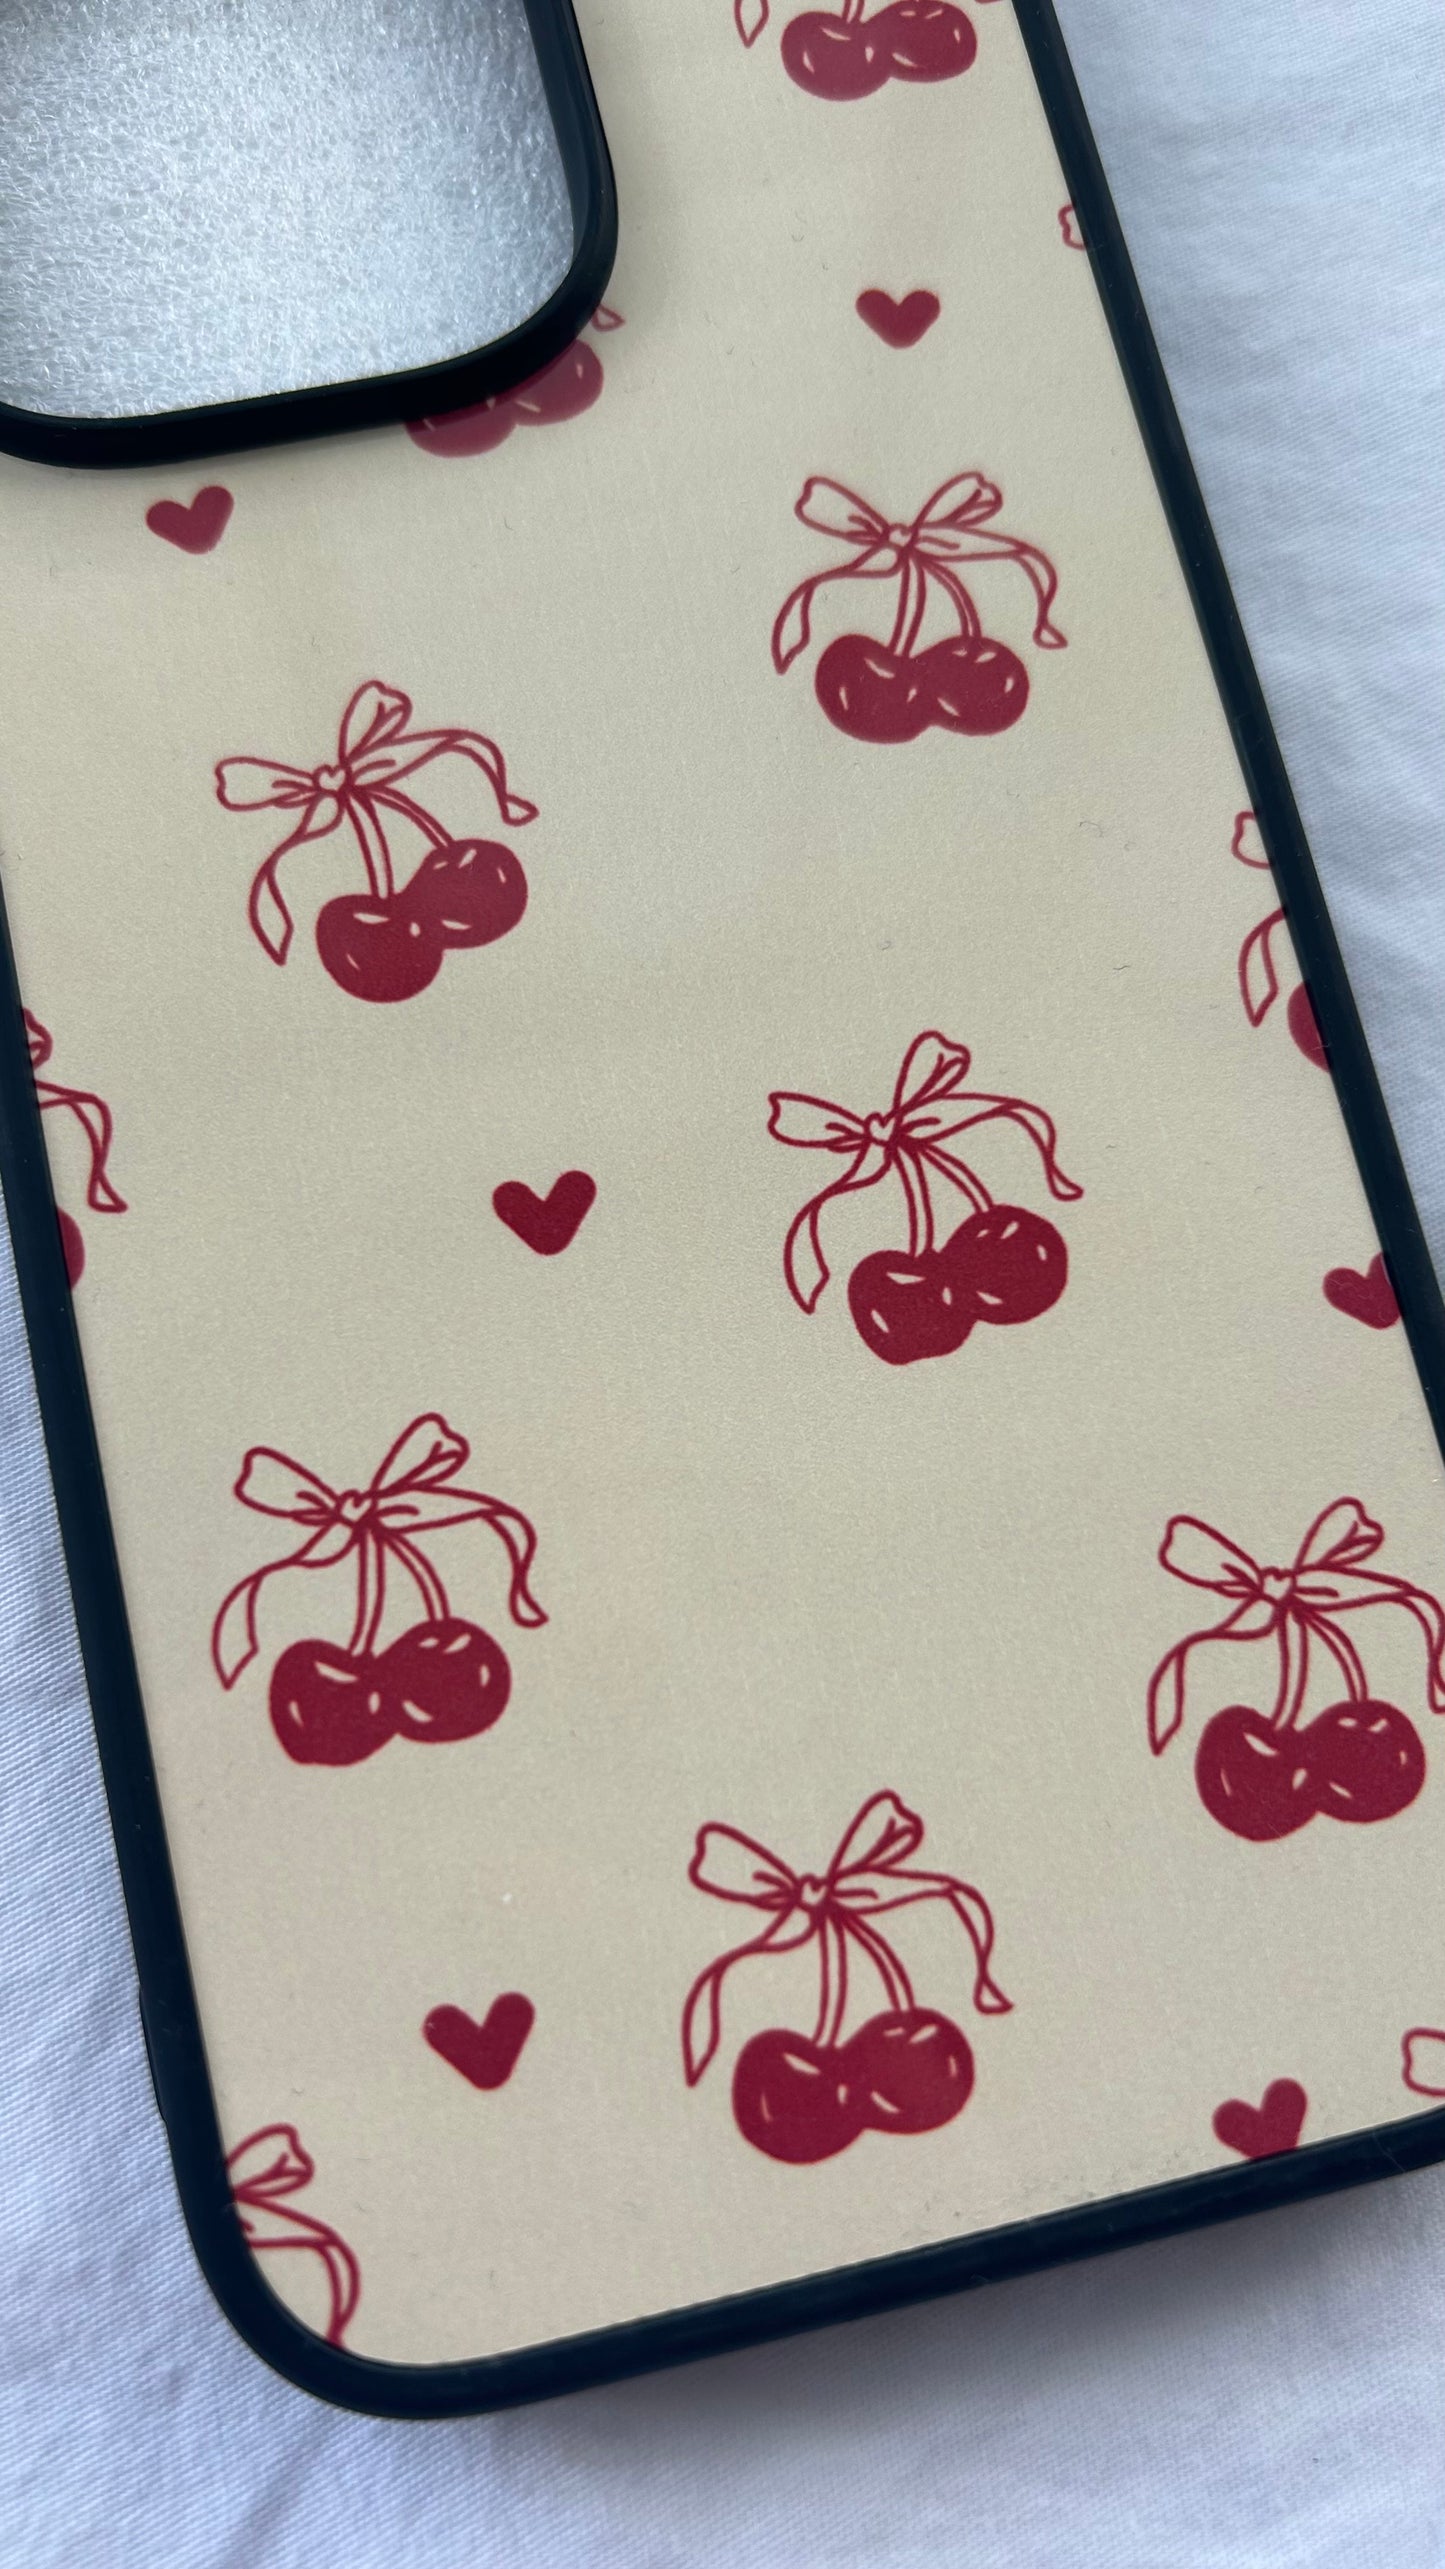 CLEARANCE 14 PRO MAX - Cherry Hearts Phone Case